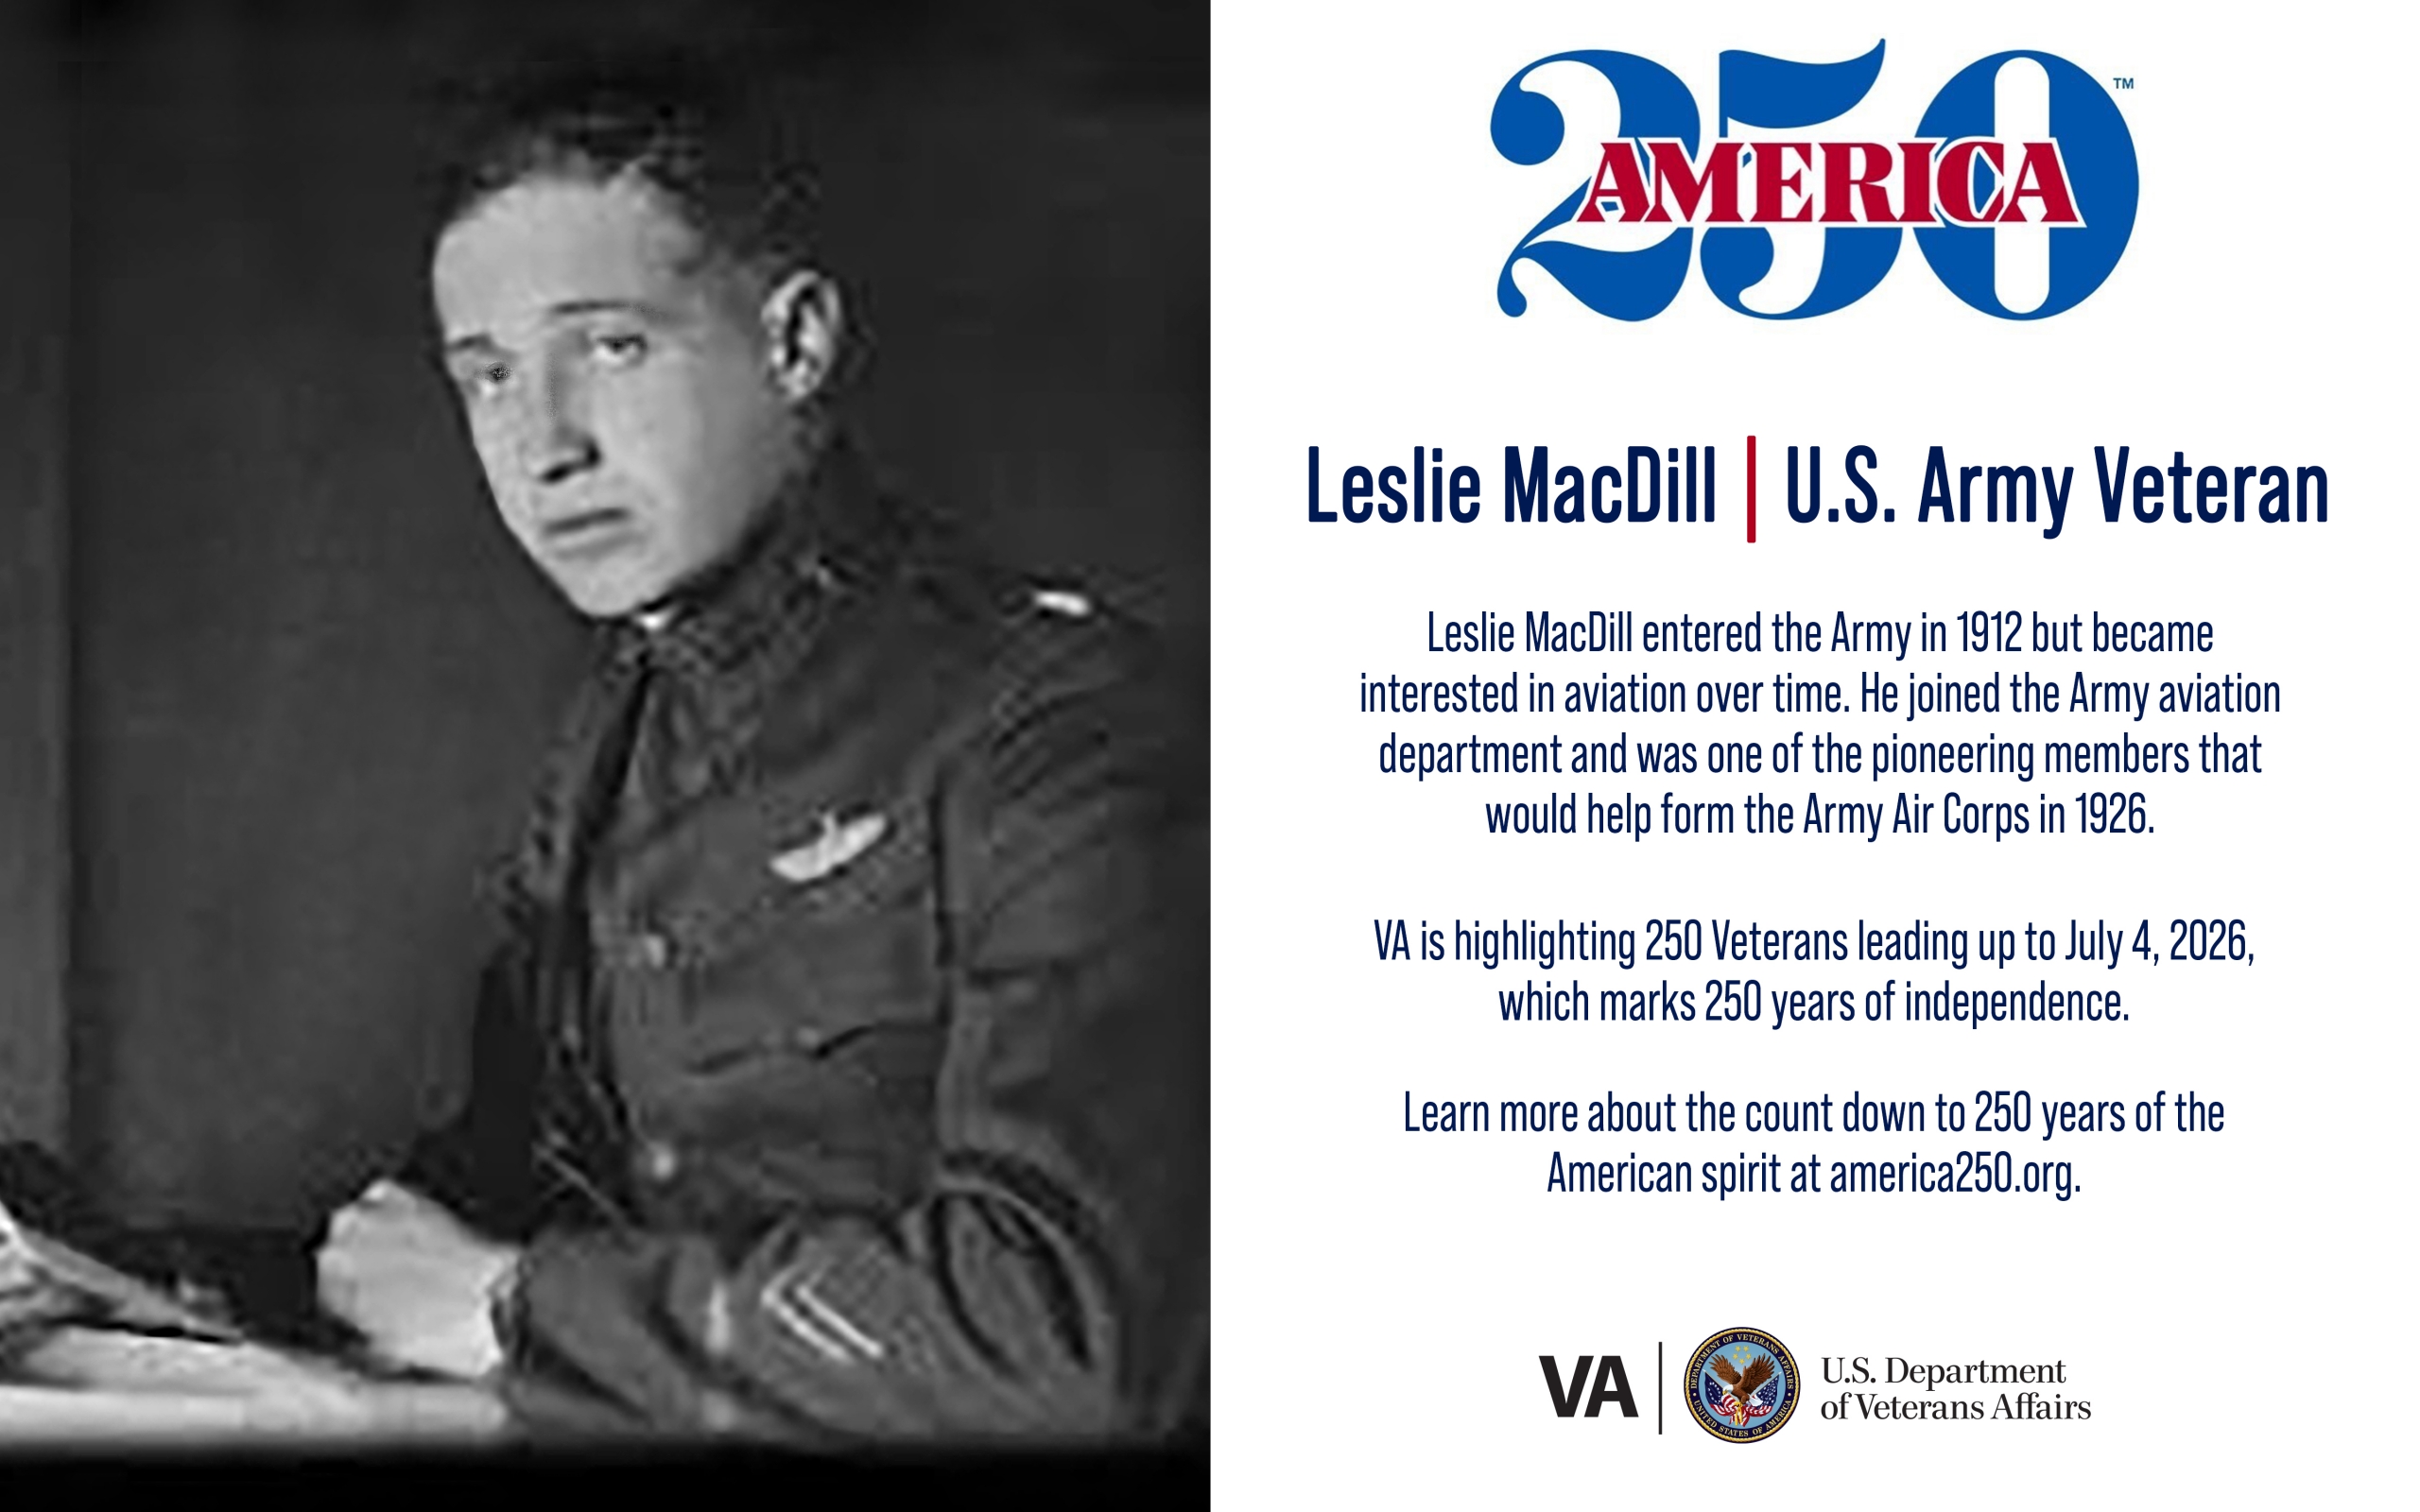 This week’s America250 salute is Army Veteran Leslie MacDill, the namesake of MacDill Air Force Base who is considered one of aviation’s early pioneers.